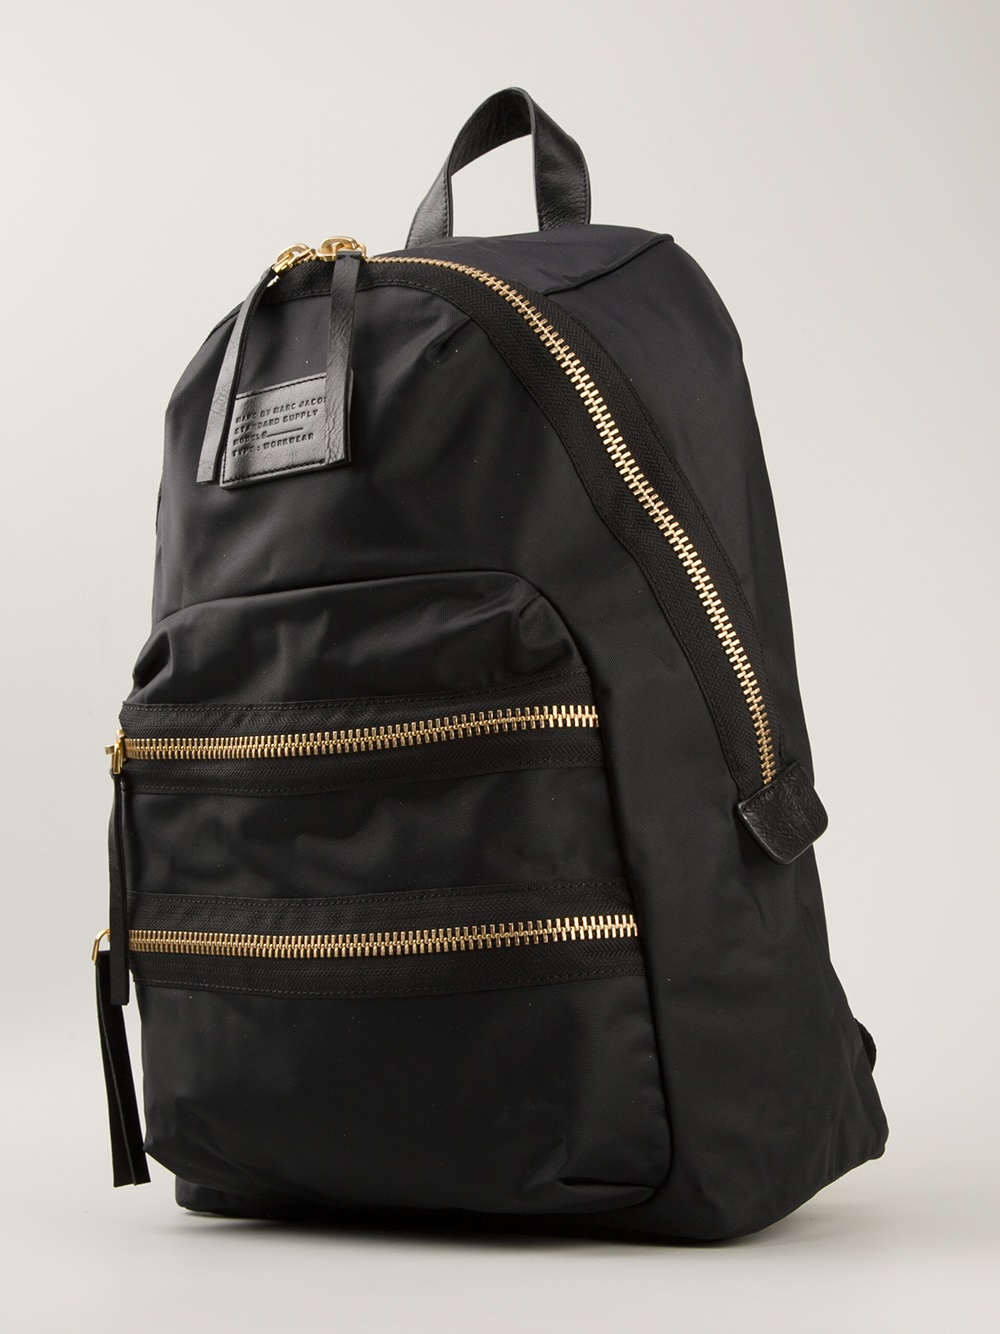 marc by marc jacobs domo arigato packrat backpack